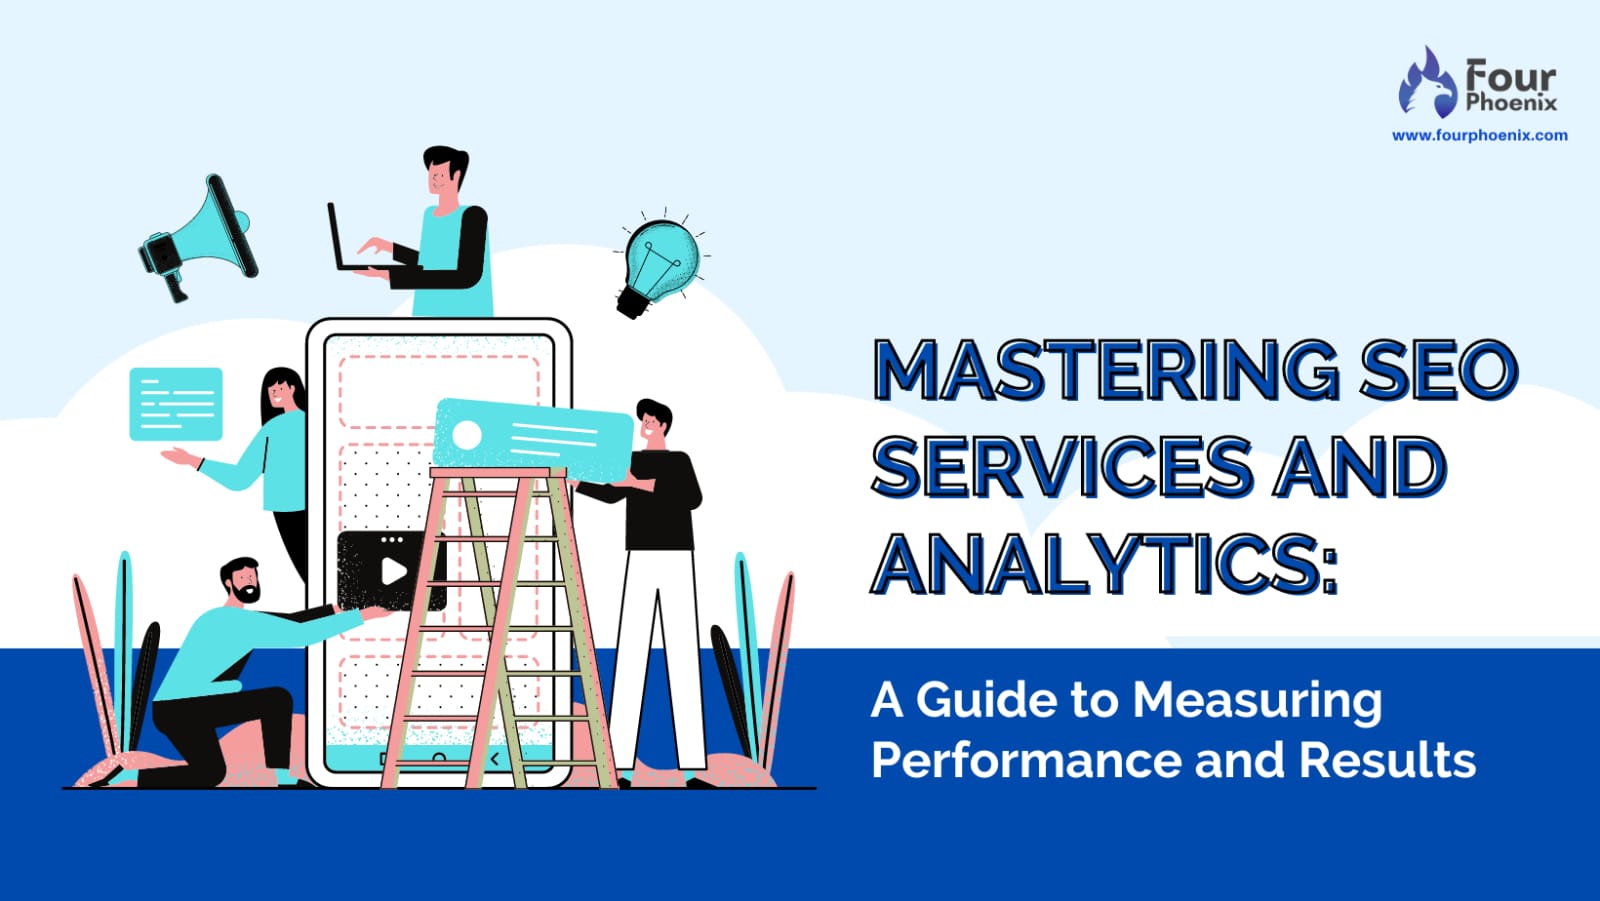 Mastering SEO Services and Analytics: A Guide to Measuring Performance and Results